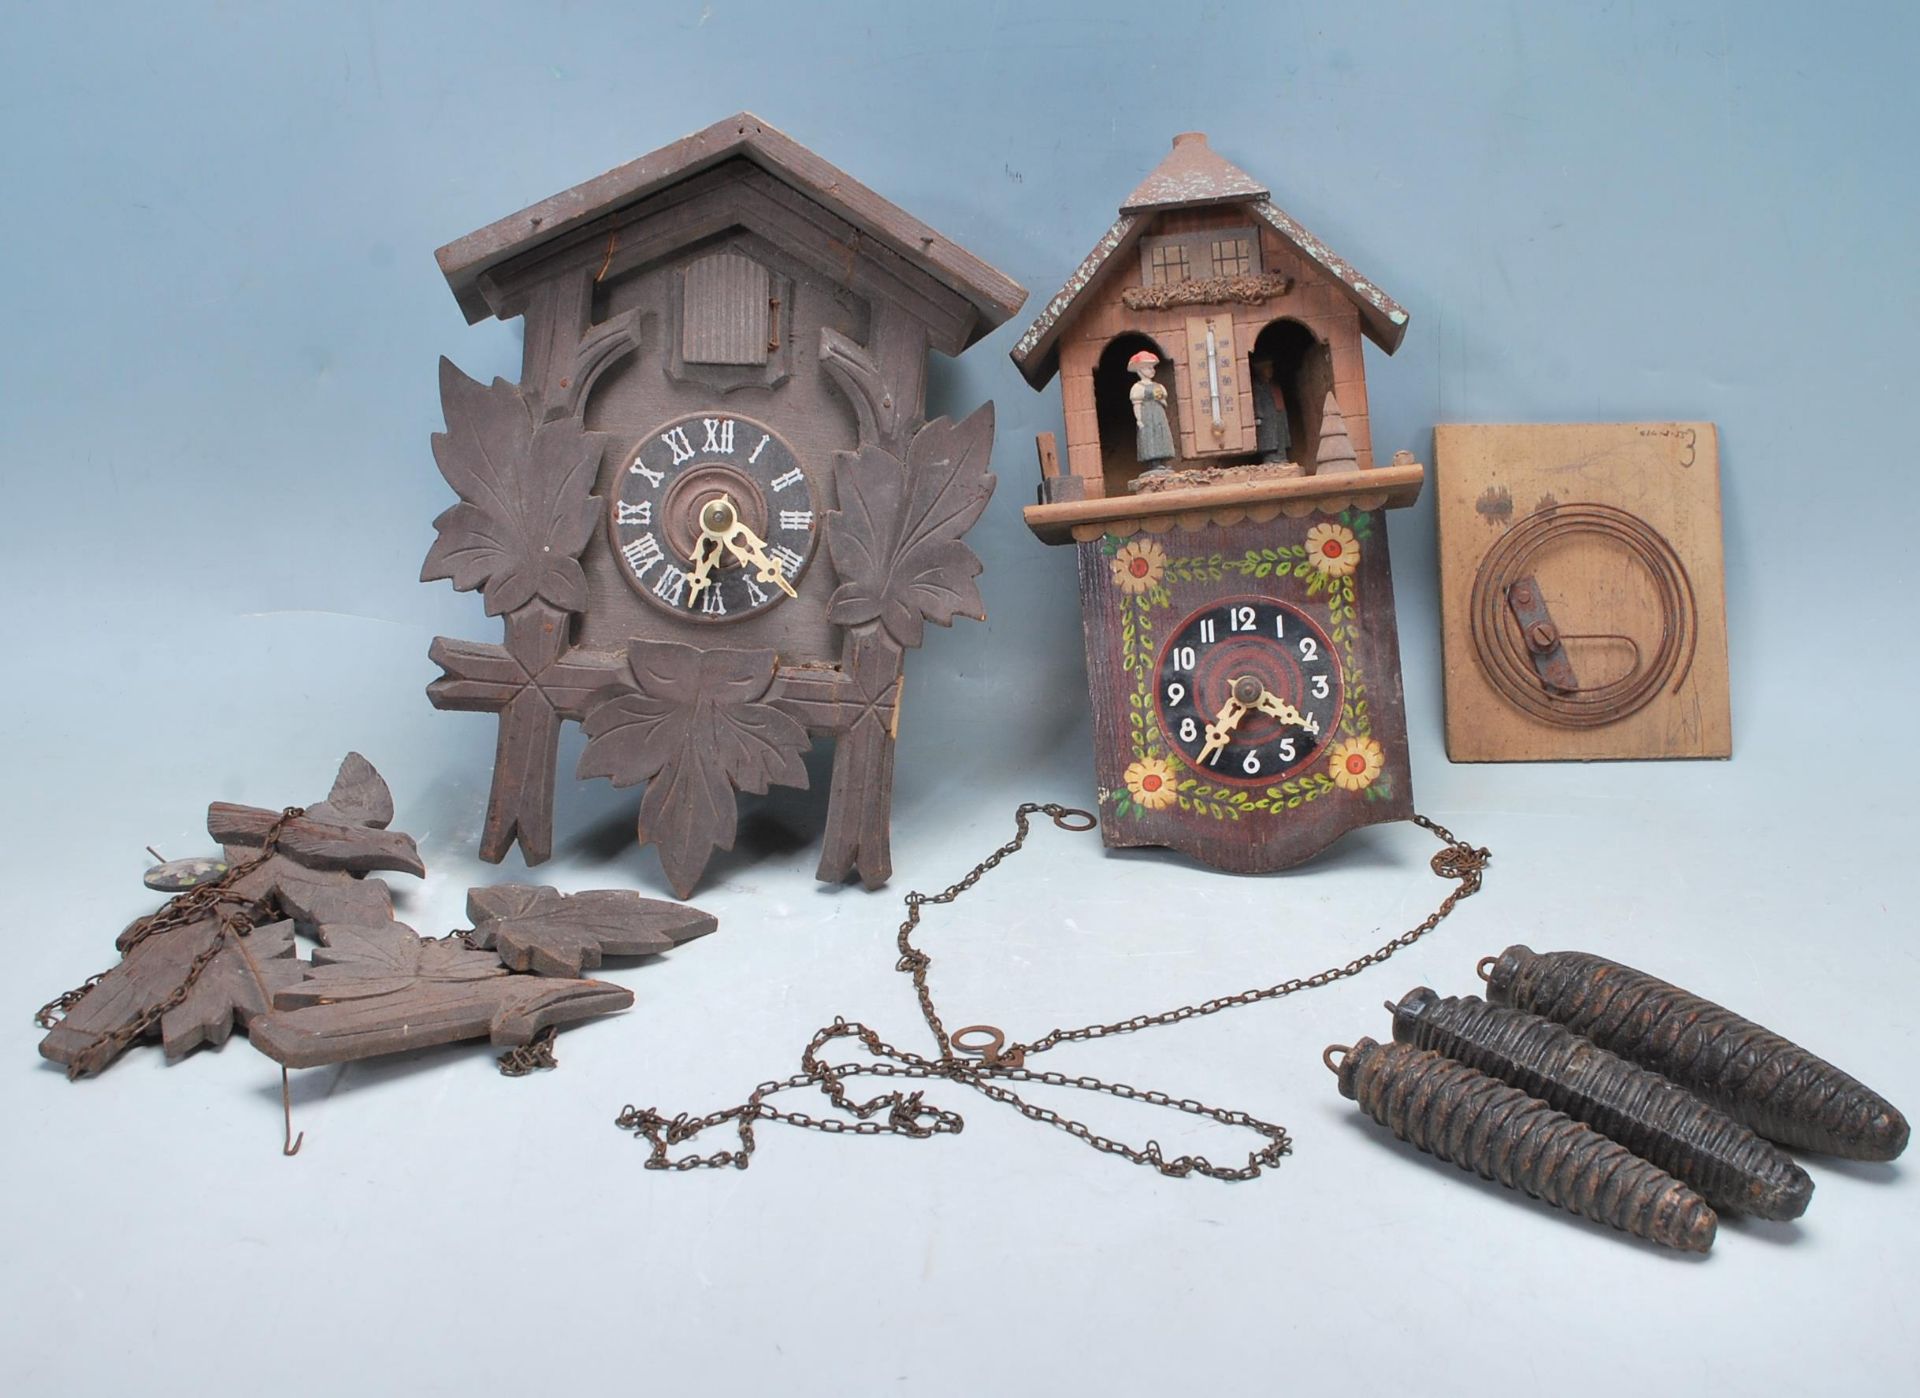 TWO EARLY 20TH CENTURY GERMAN BLACK FOREST CUCKOO CLOCKS